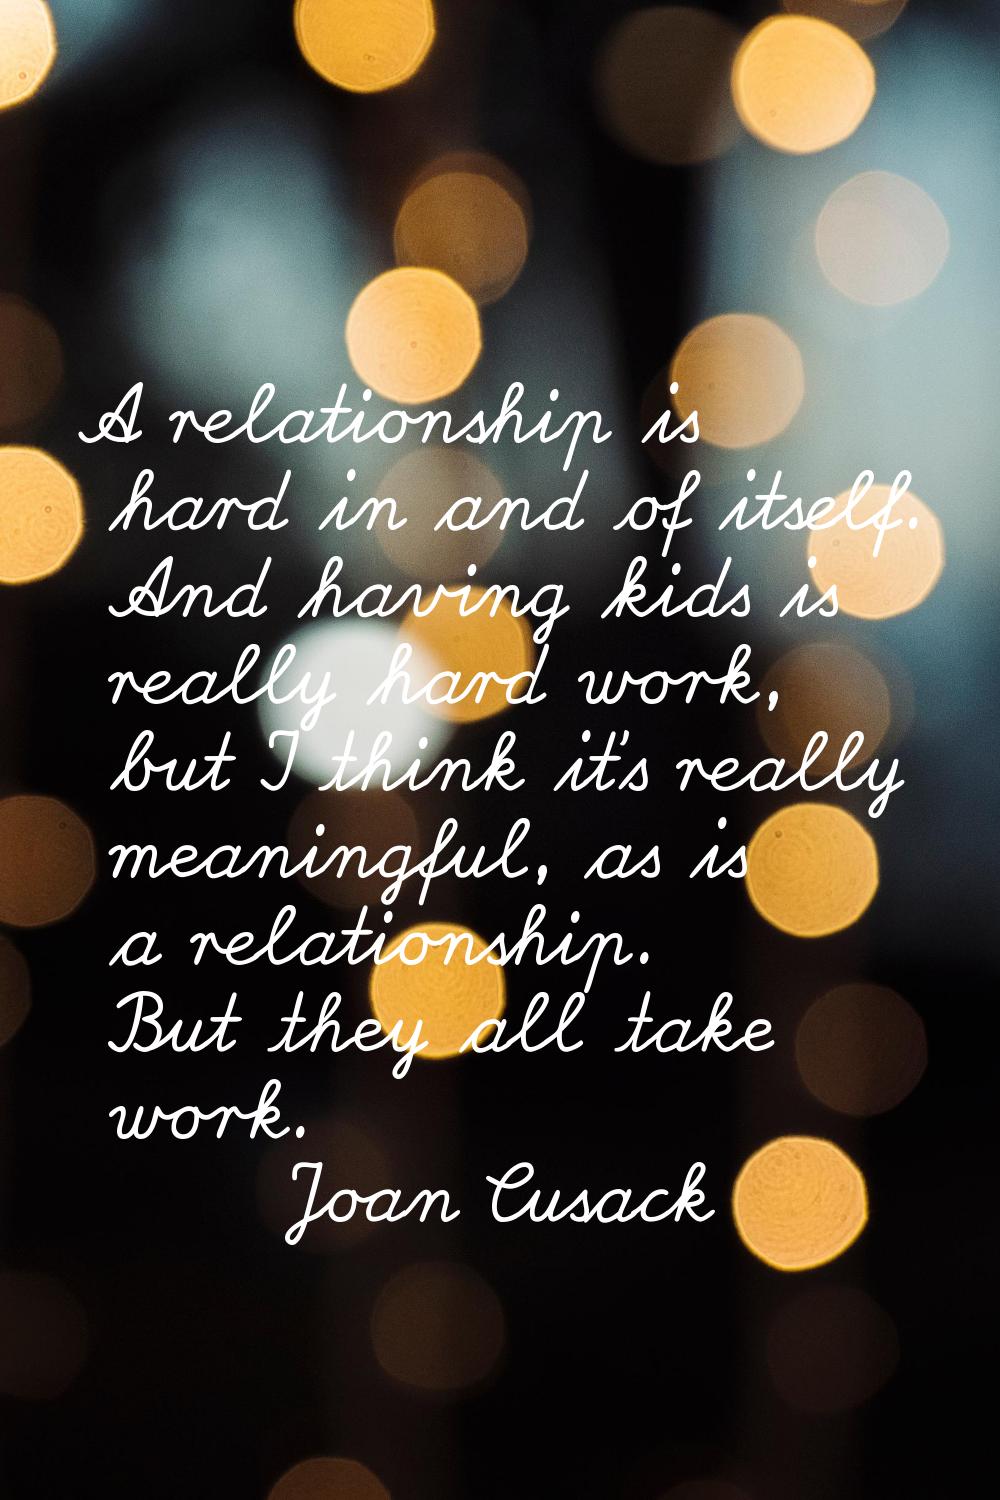 A relationship is hard in and of itself. And having kids is really hard work, but I think it's real